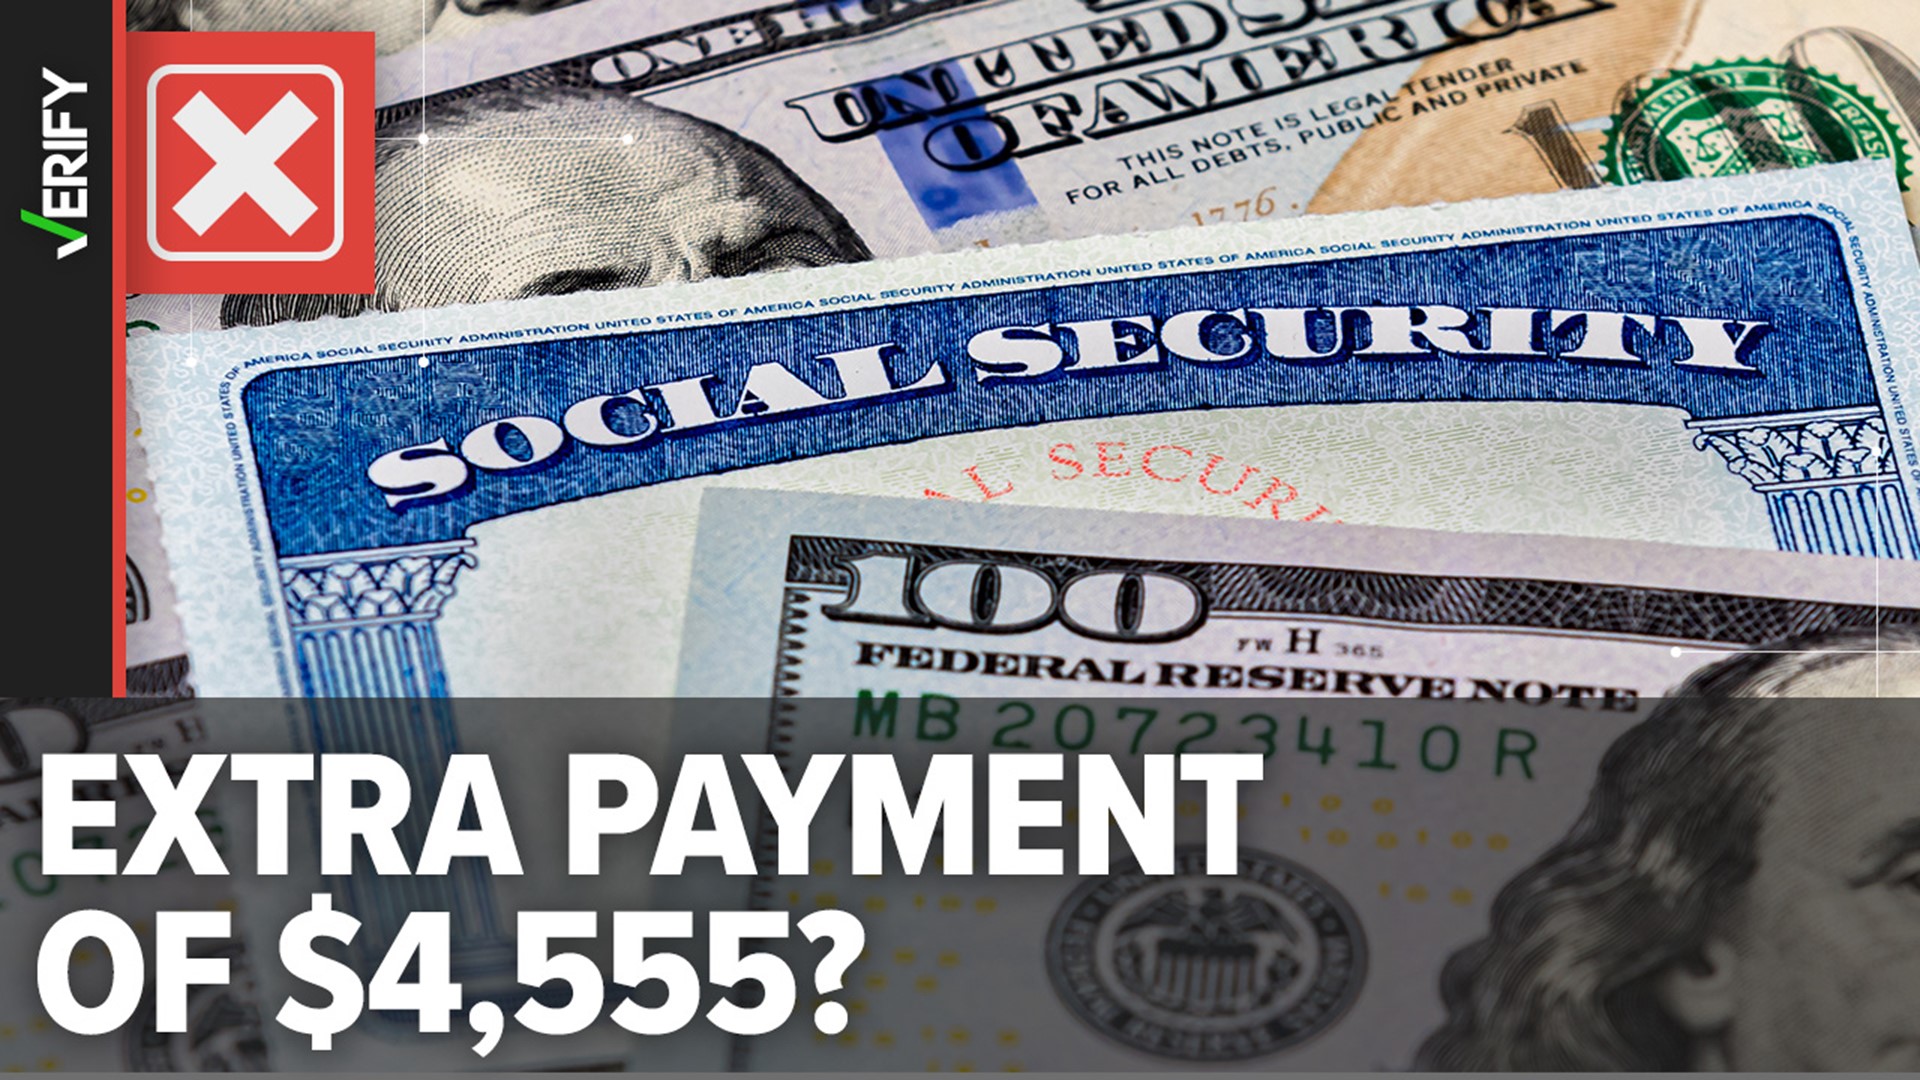 A headline uses misleading language to refer to regular monthly benefit payments. Social Security recipients are not receiving one-time bonus checks.